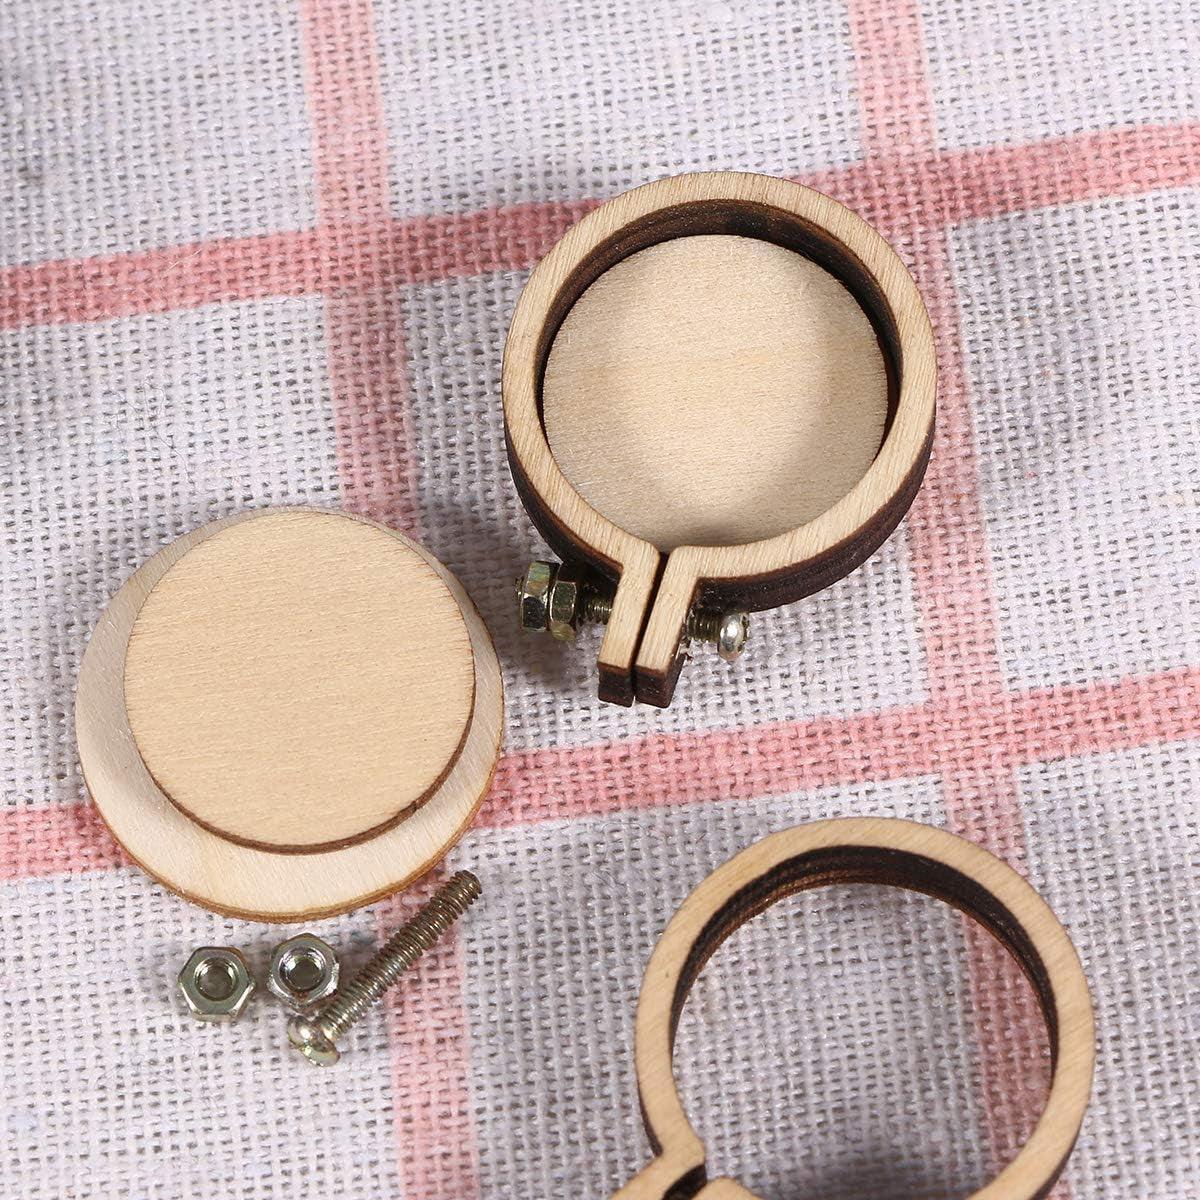 4 inch Embroidery Frame,Embroidery Hoop,Hoop Embroidery, Imitated Wood Display Frame Circle 4 Pieces, with 1 Pcs Sewing Needle Cylinder